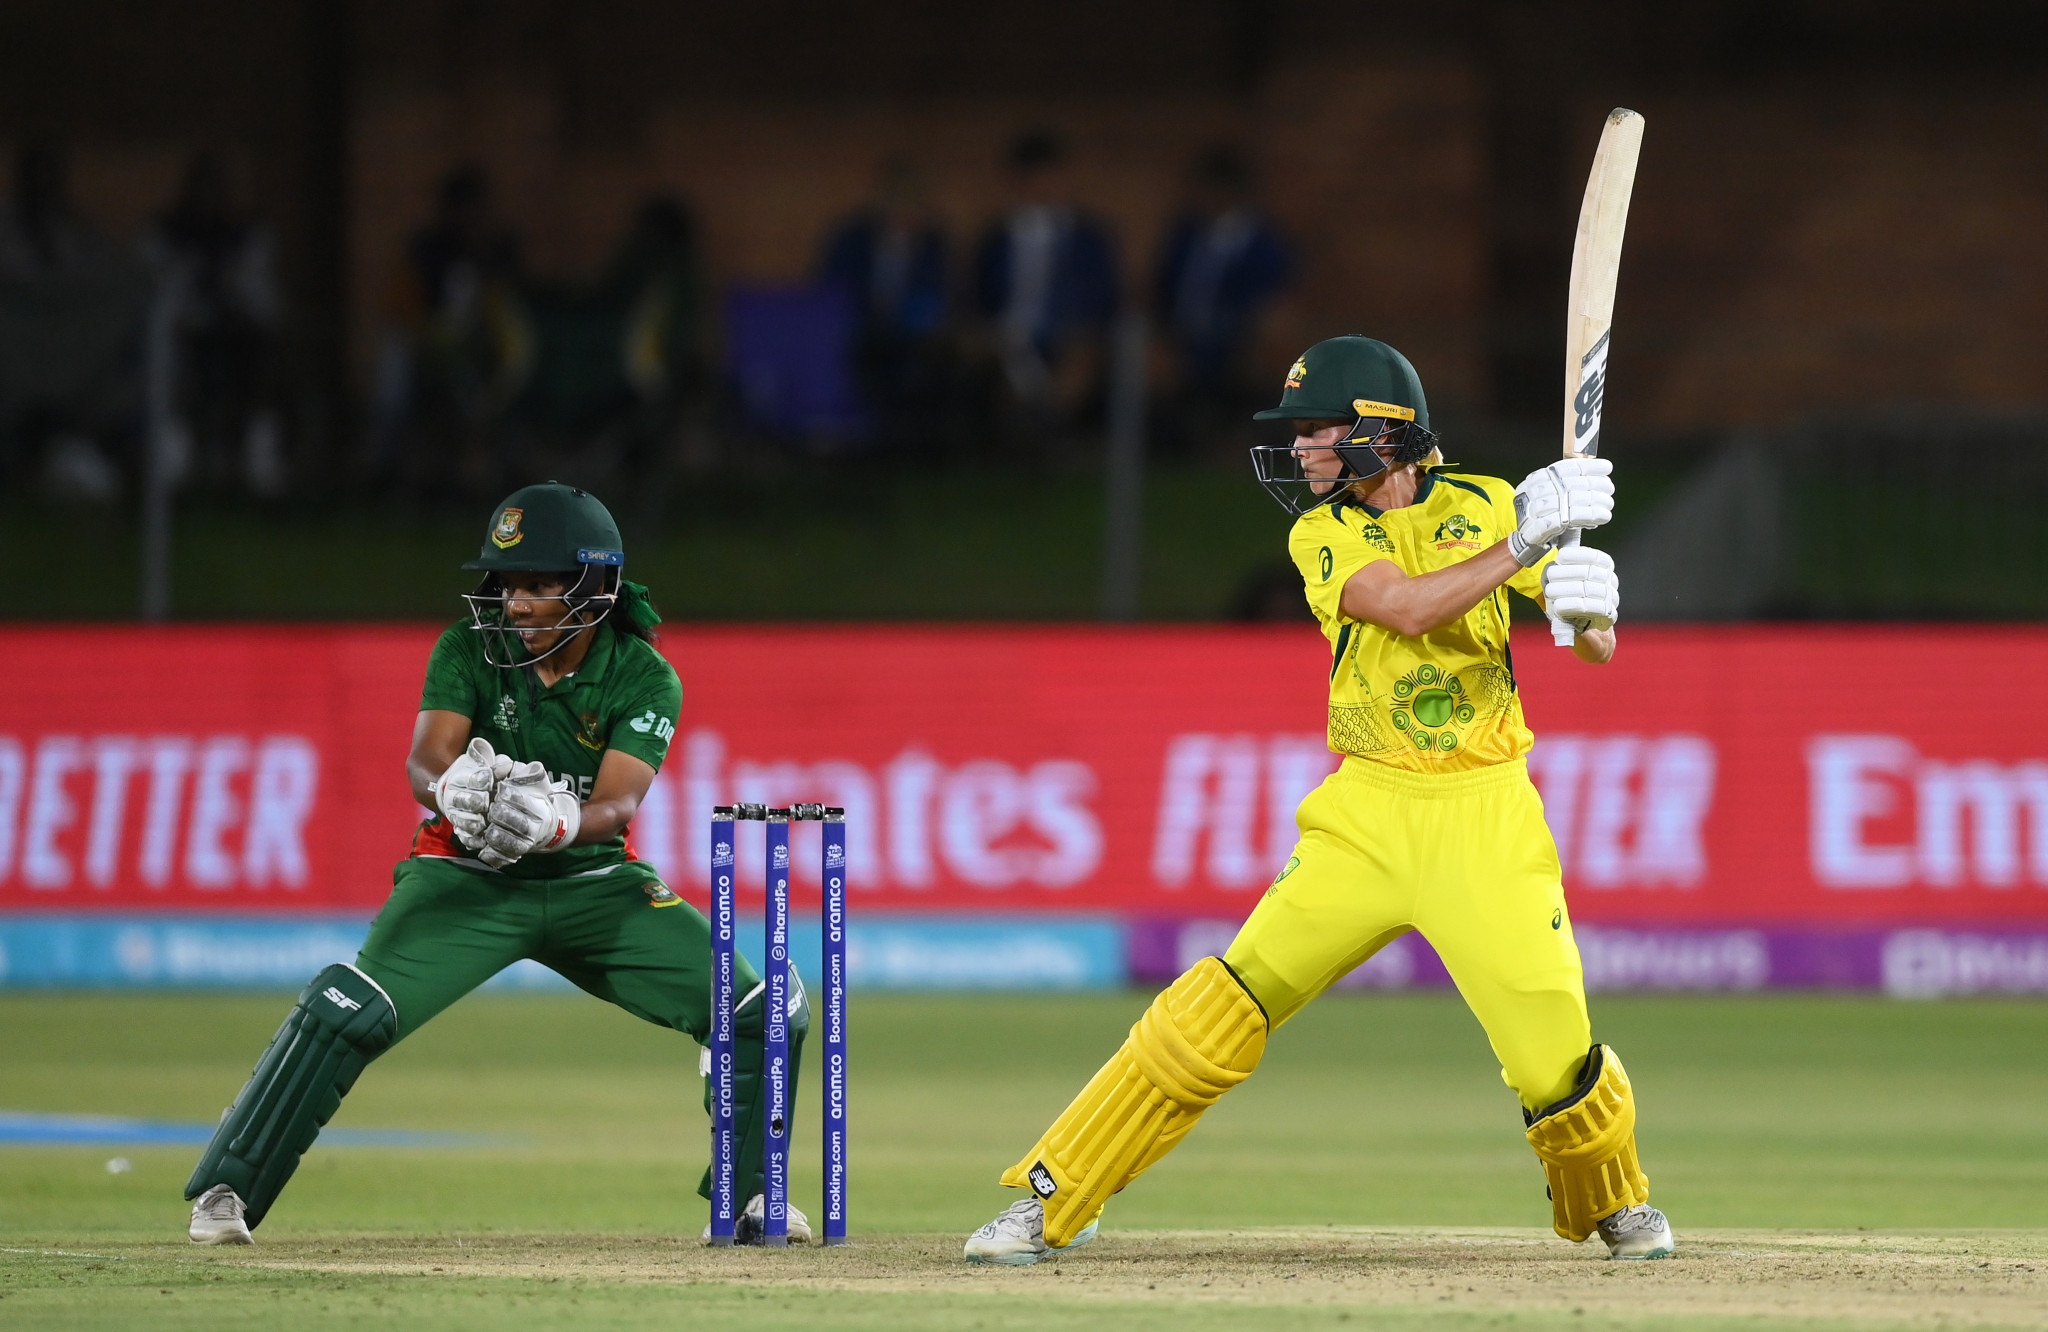 Meg Lanning scored 48 runs off 49 balls as Australia eased to victory against Bangladesh ©Getty Images